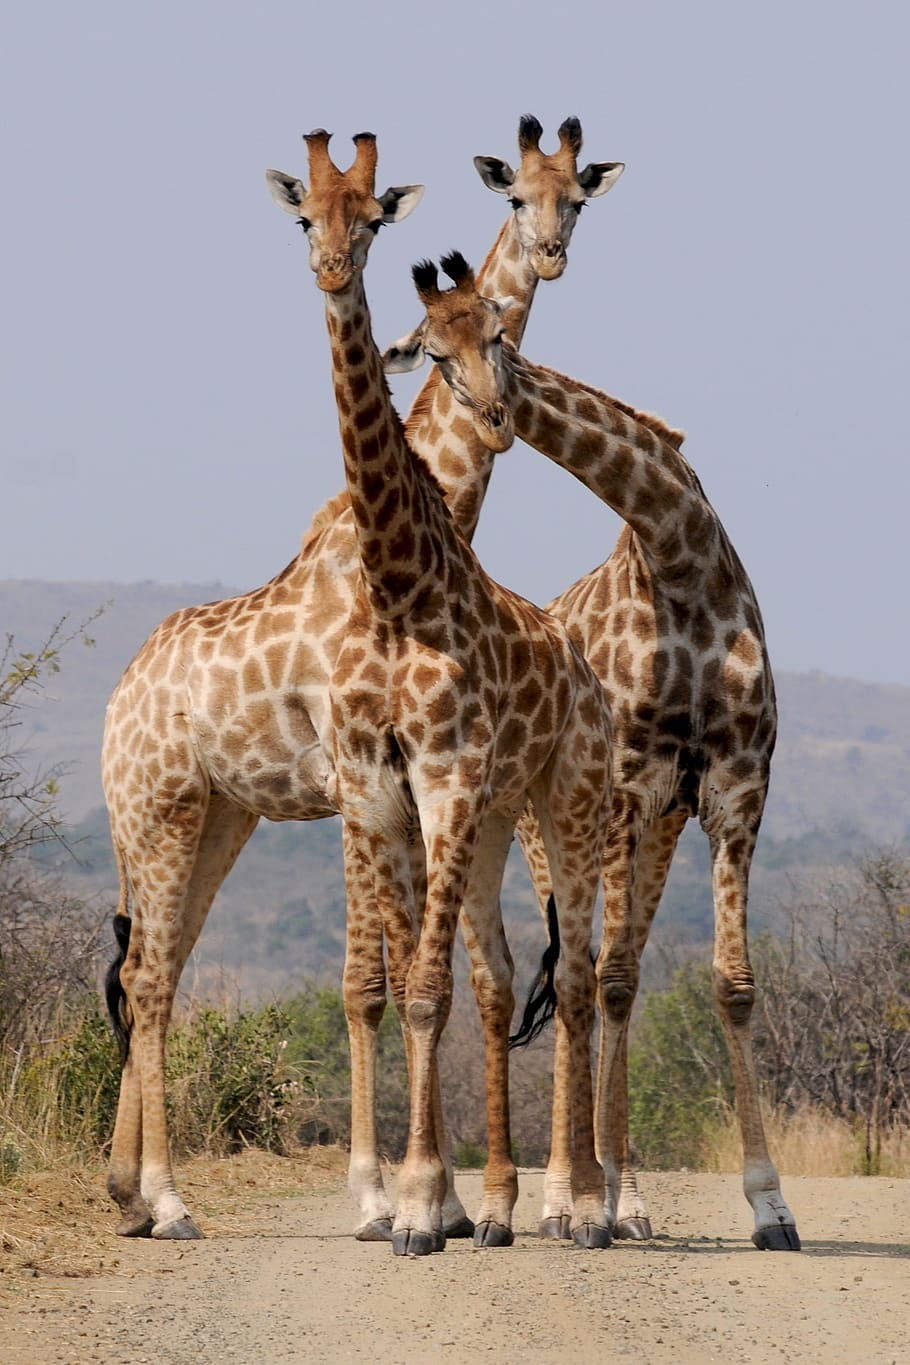 three, giraffes, standing, middle, field, south africa, national park, hluhluwe, formation, wild animal